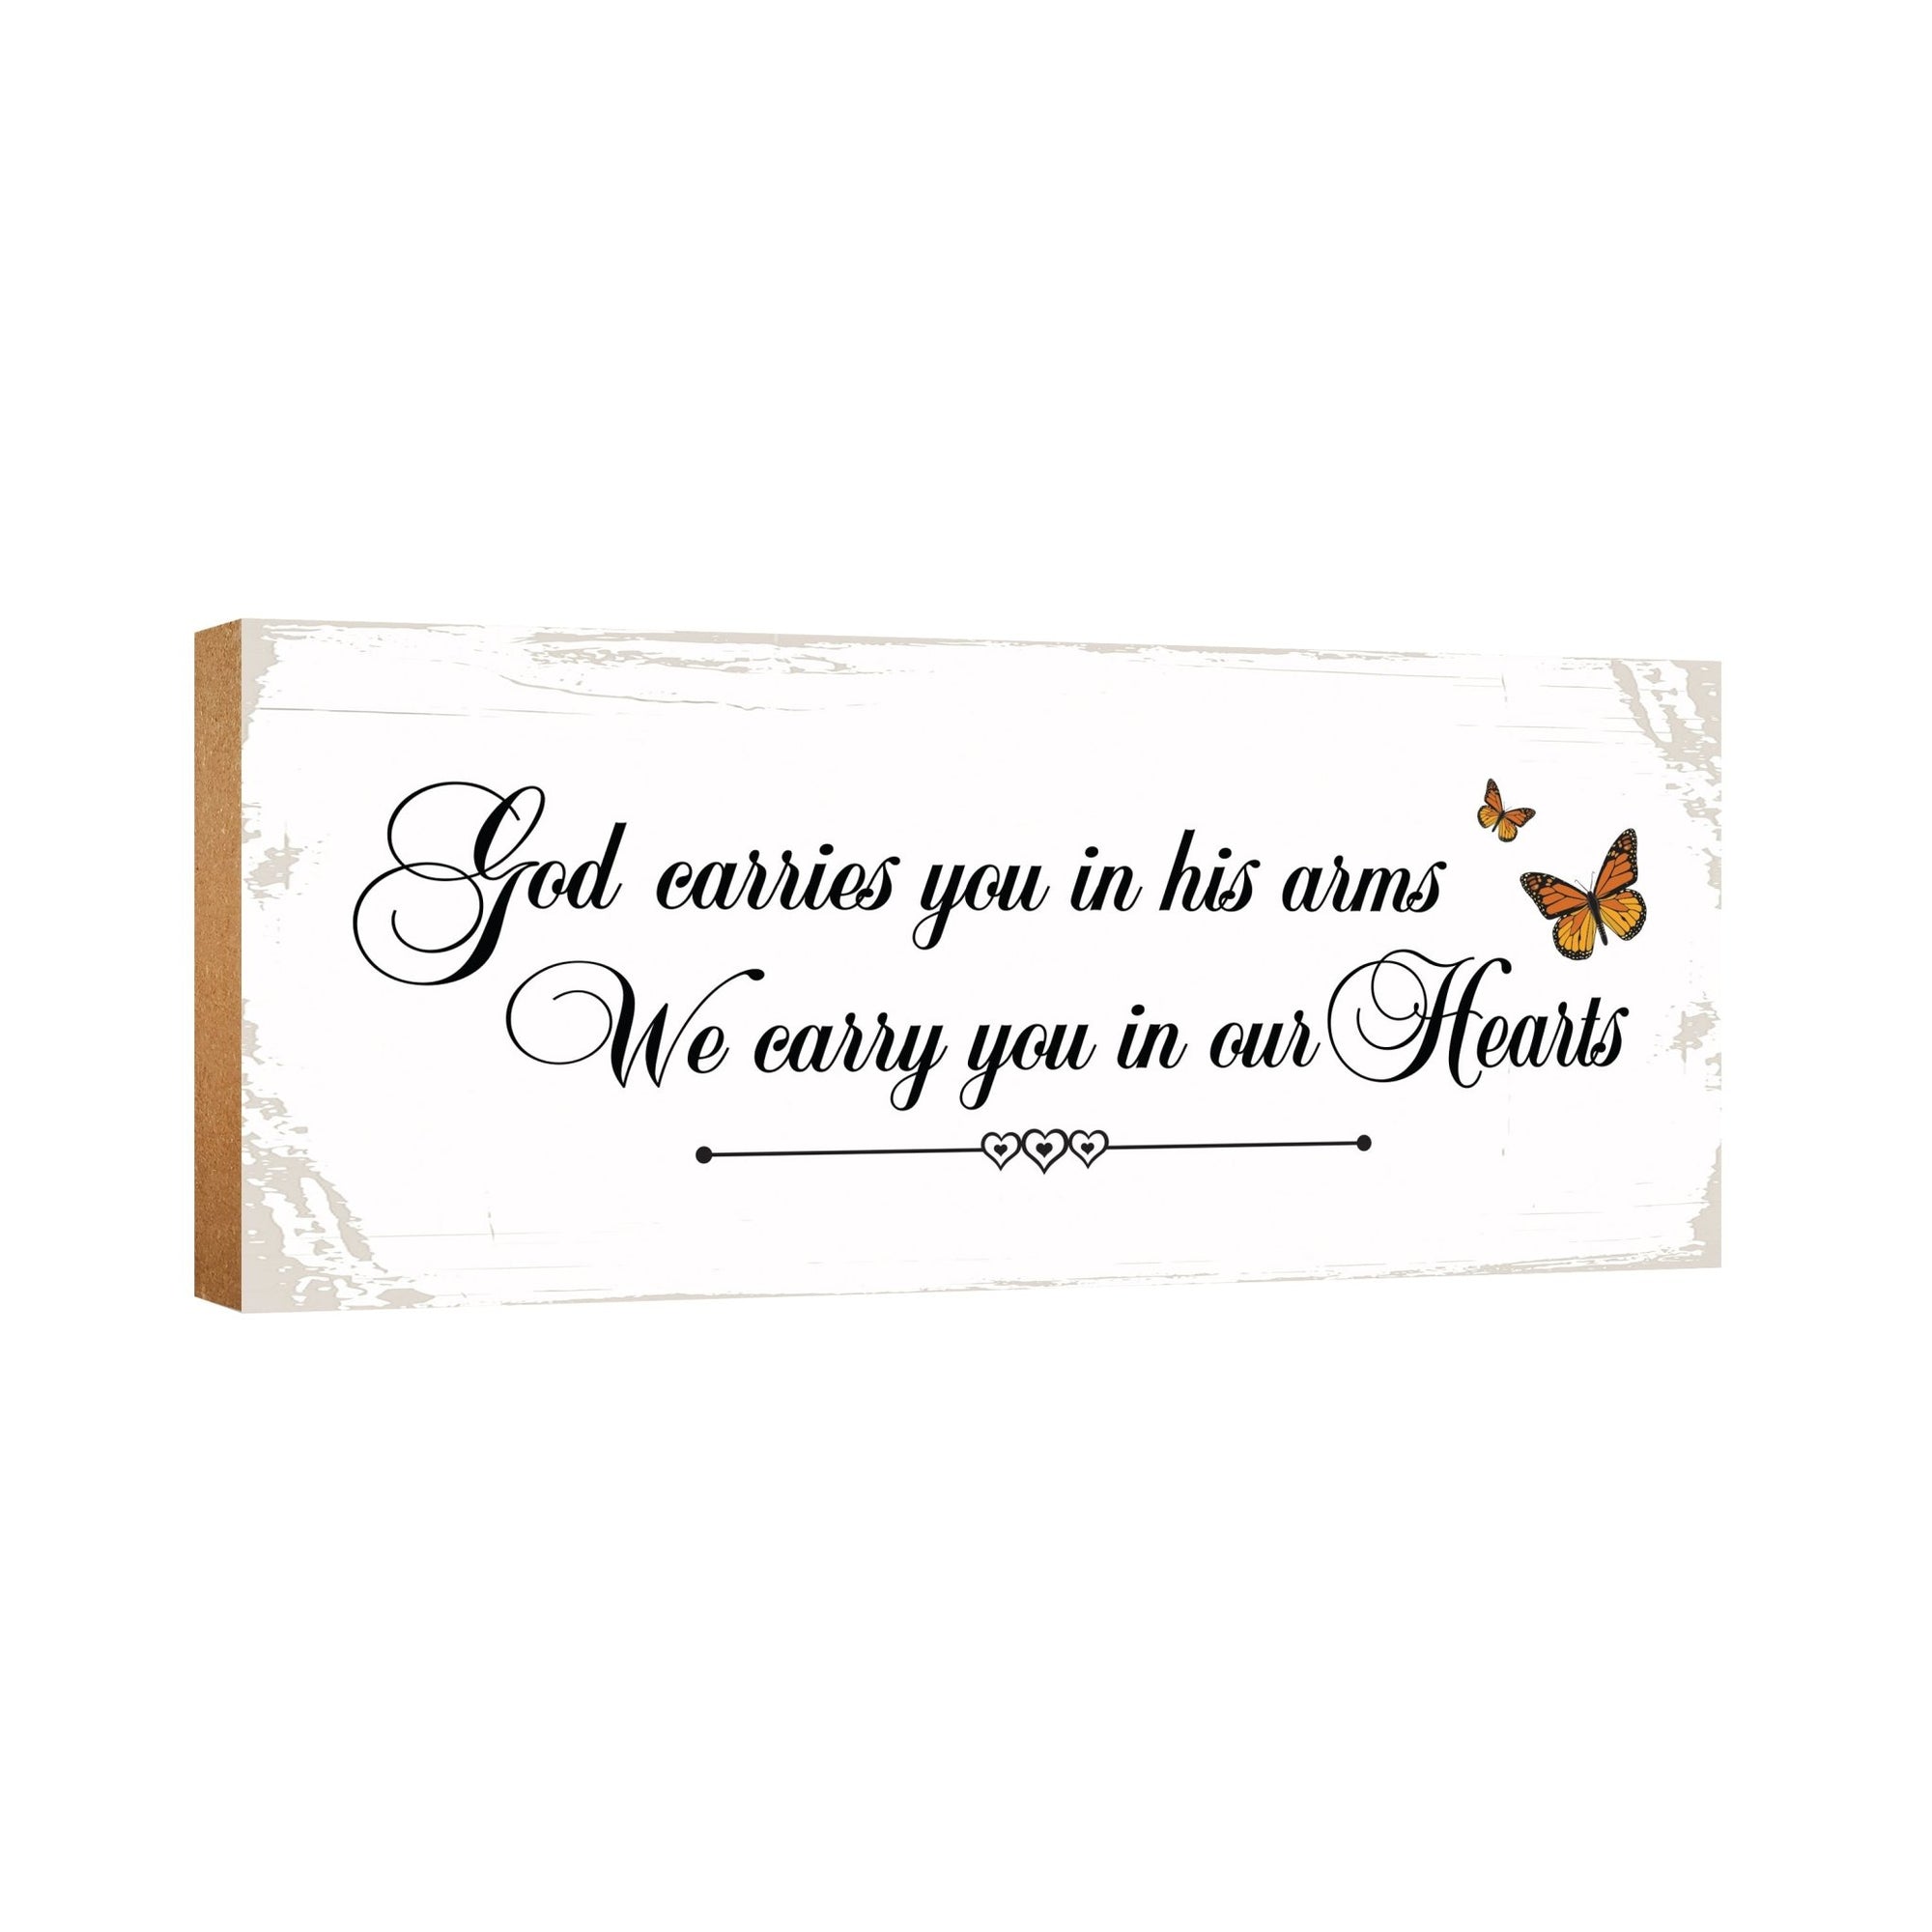 Modern Inspirational Pet Memorial 4x10 inches Wooden Sign (God Carries You) Tabletop Plaque Home Decoration Loss of Pet Bereavement Sympathy Keepsake - LifeSong Milestones